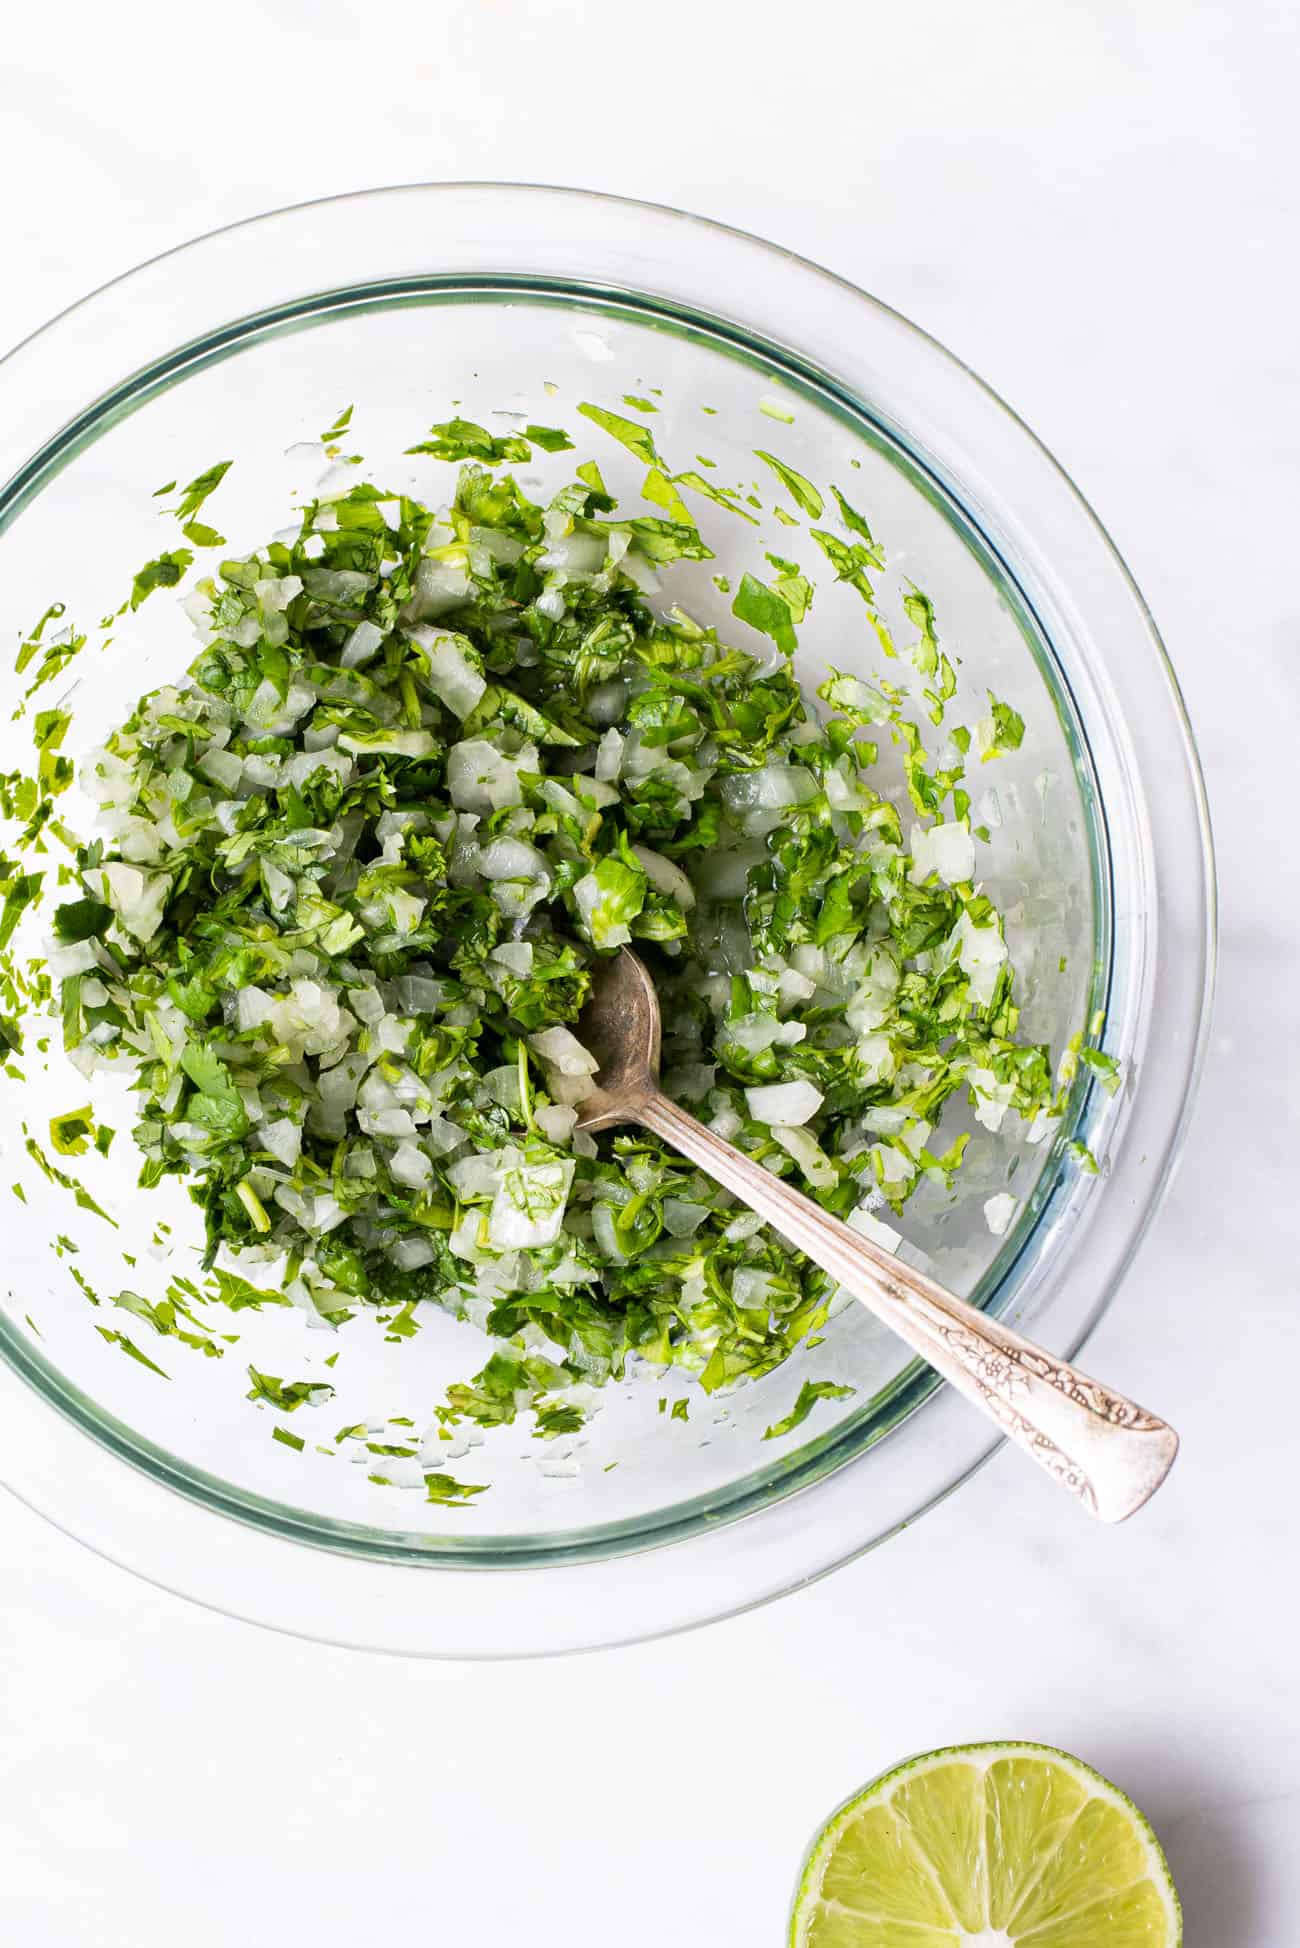 Cilantro-onion relish for tacos, in a glass bowl.